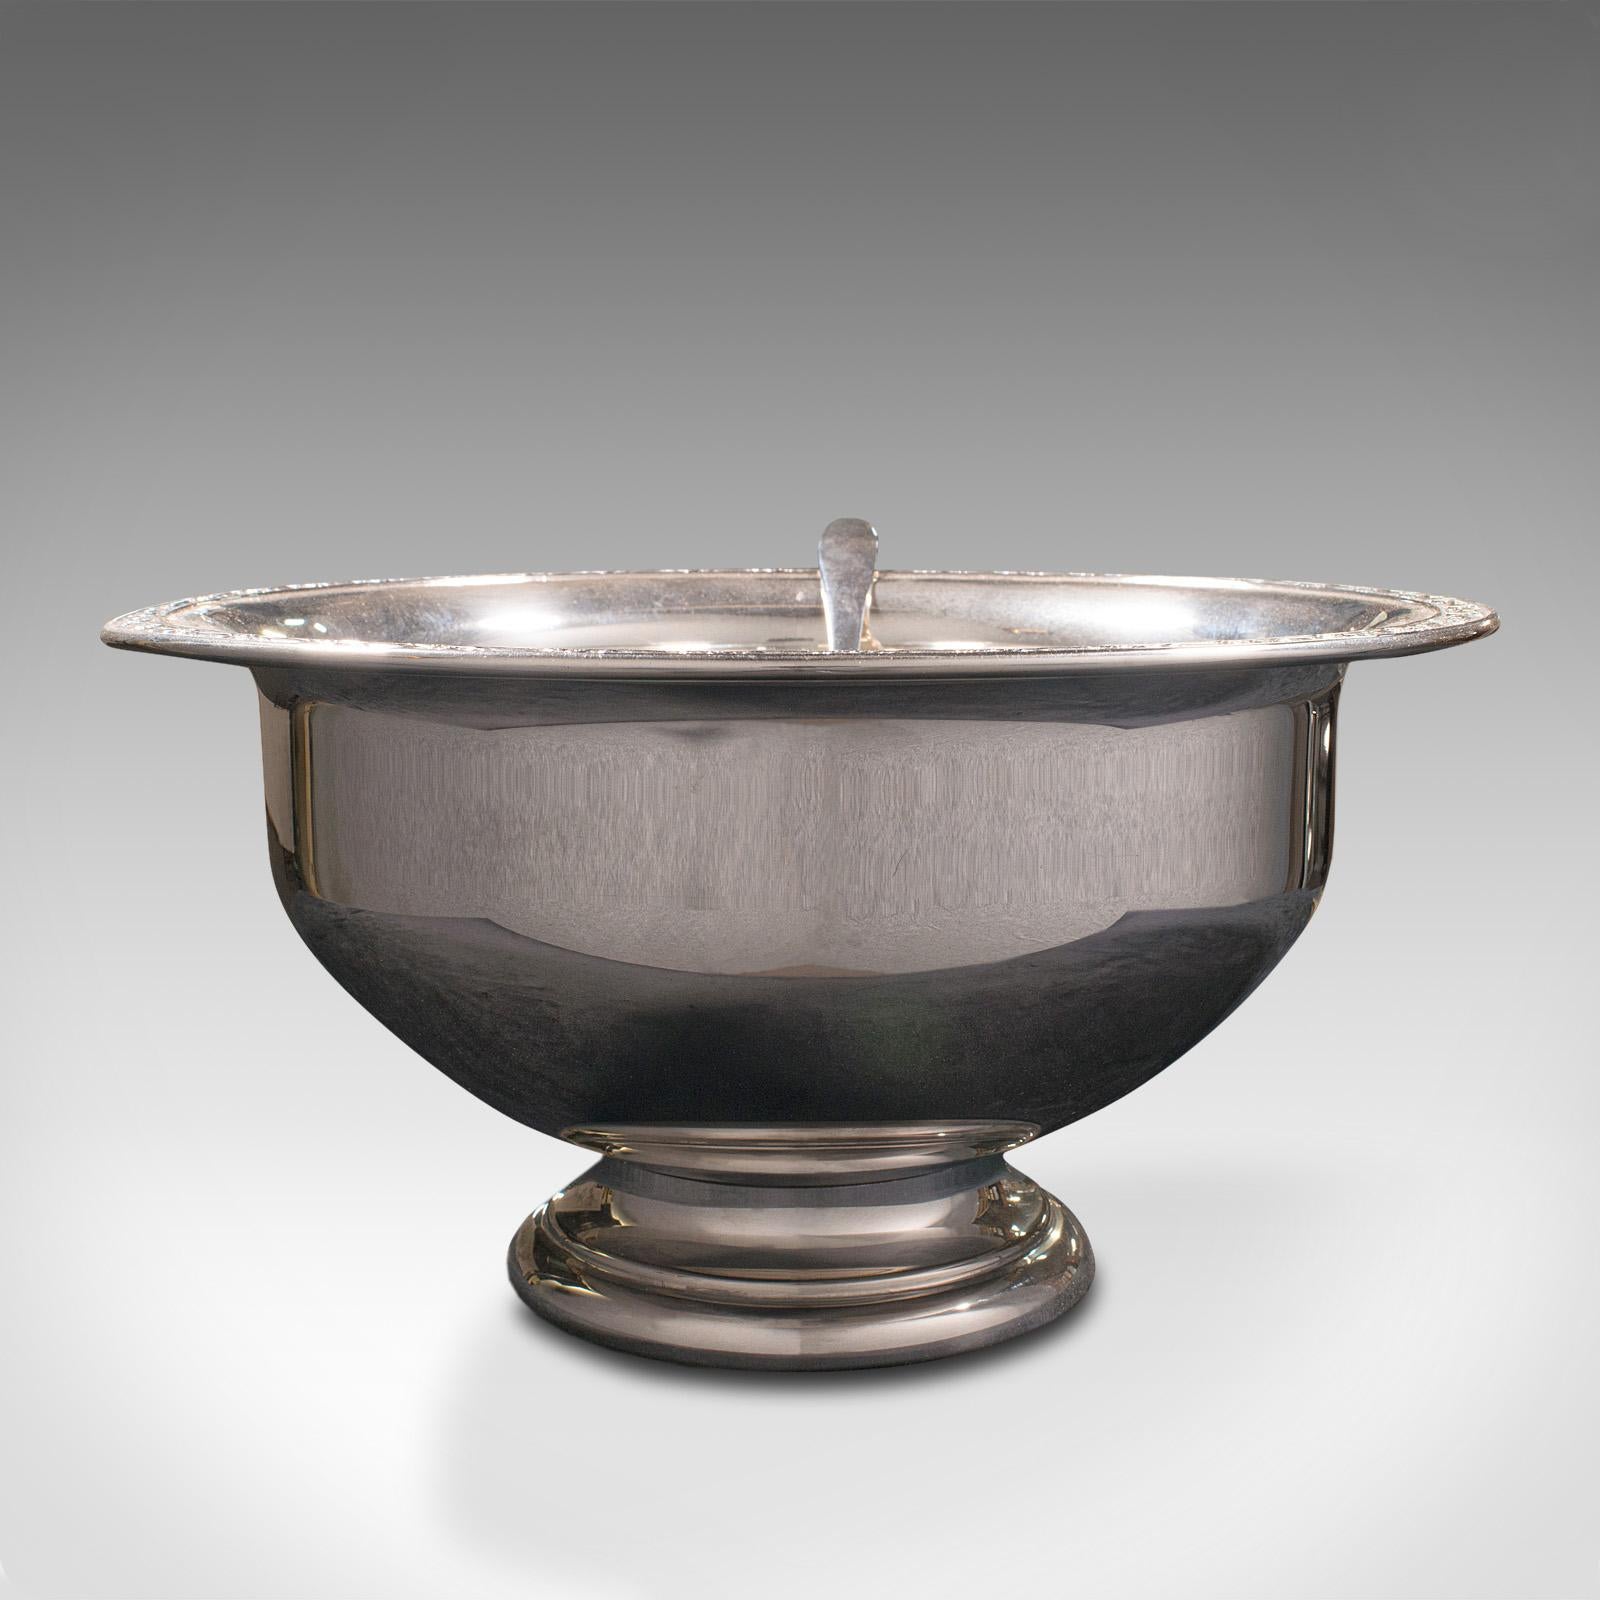 This is a vintage punch bowl. An American, silver plate serving dish with spoon, dating to the mid 20th century, circa 1950.

Wonderfully reflective with charming appearance
Displays a desirable aged patina throughout
Polished silver plate